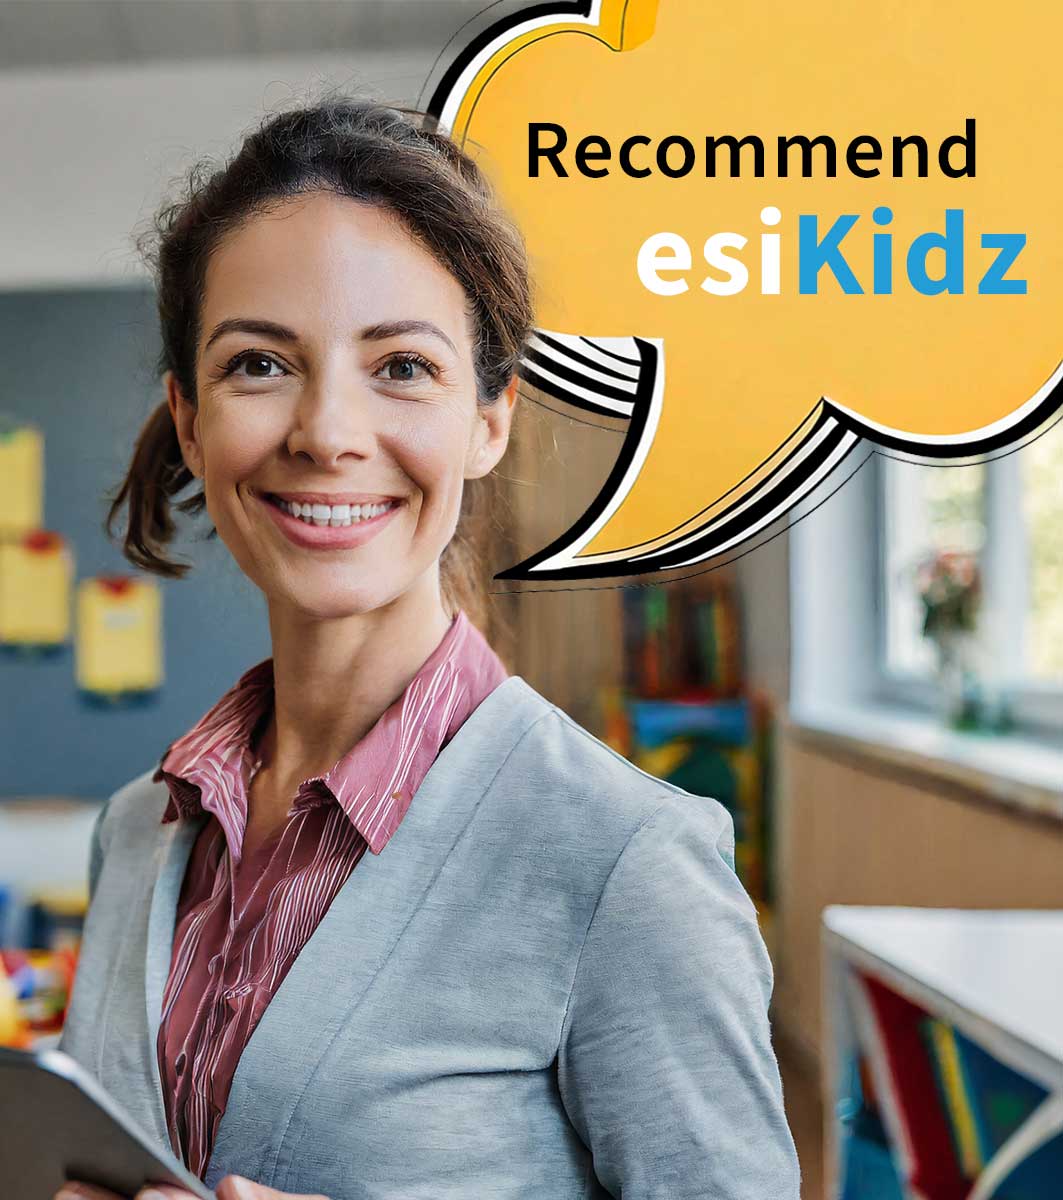 Refer within your Childcare Community